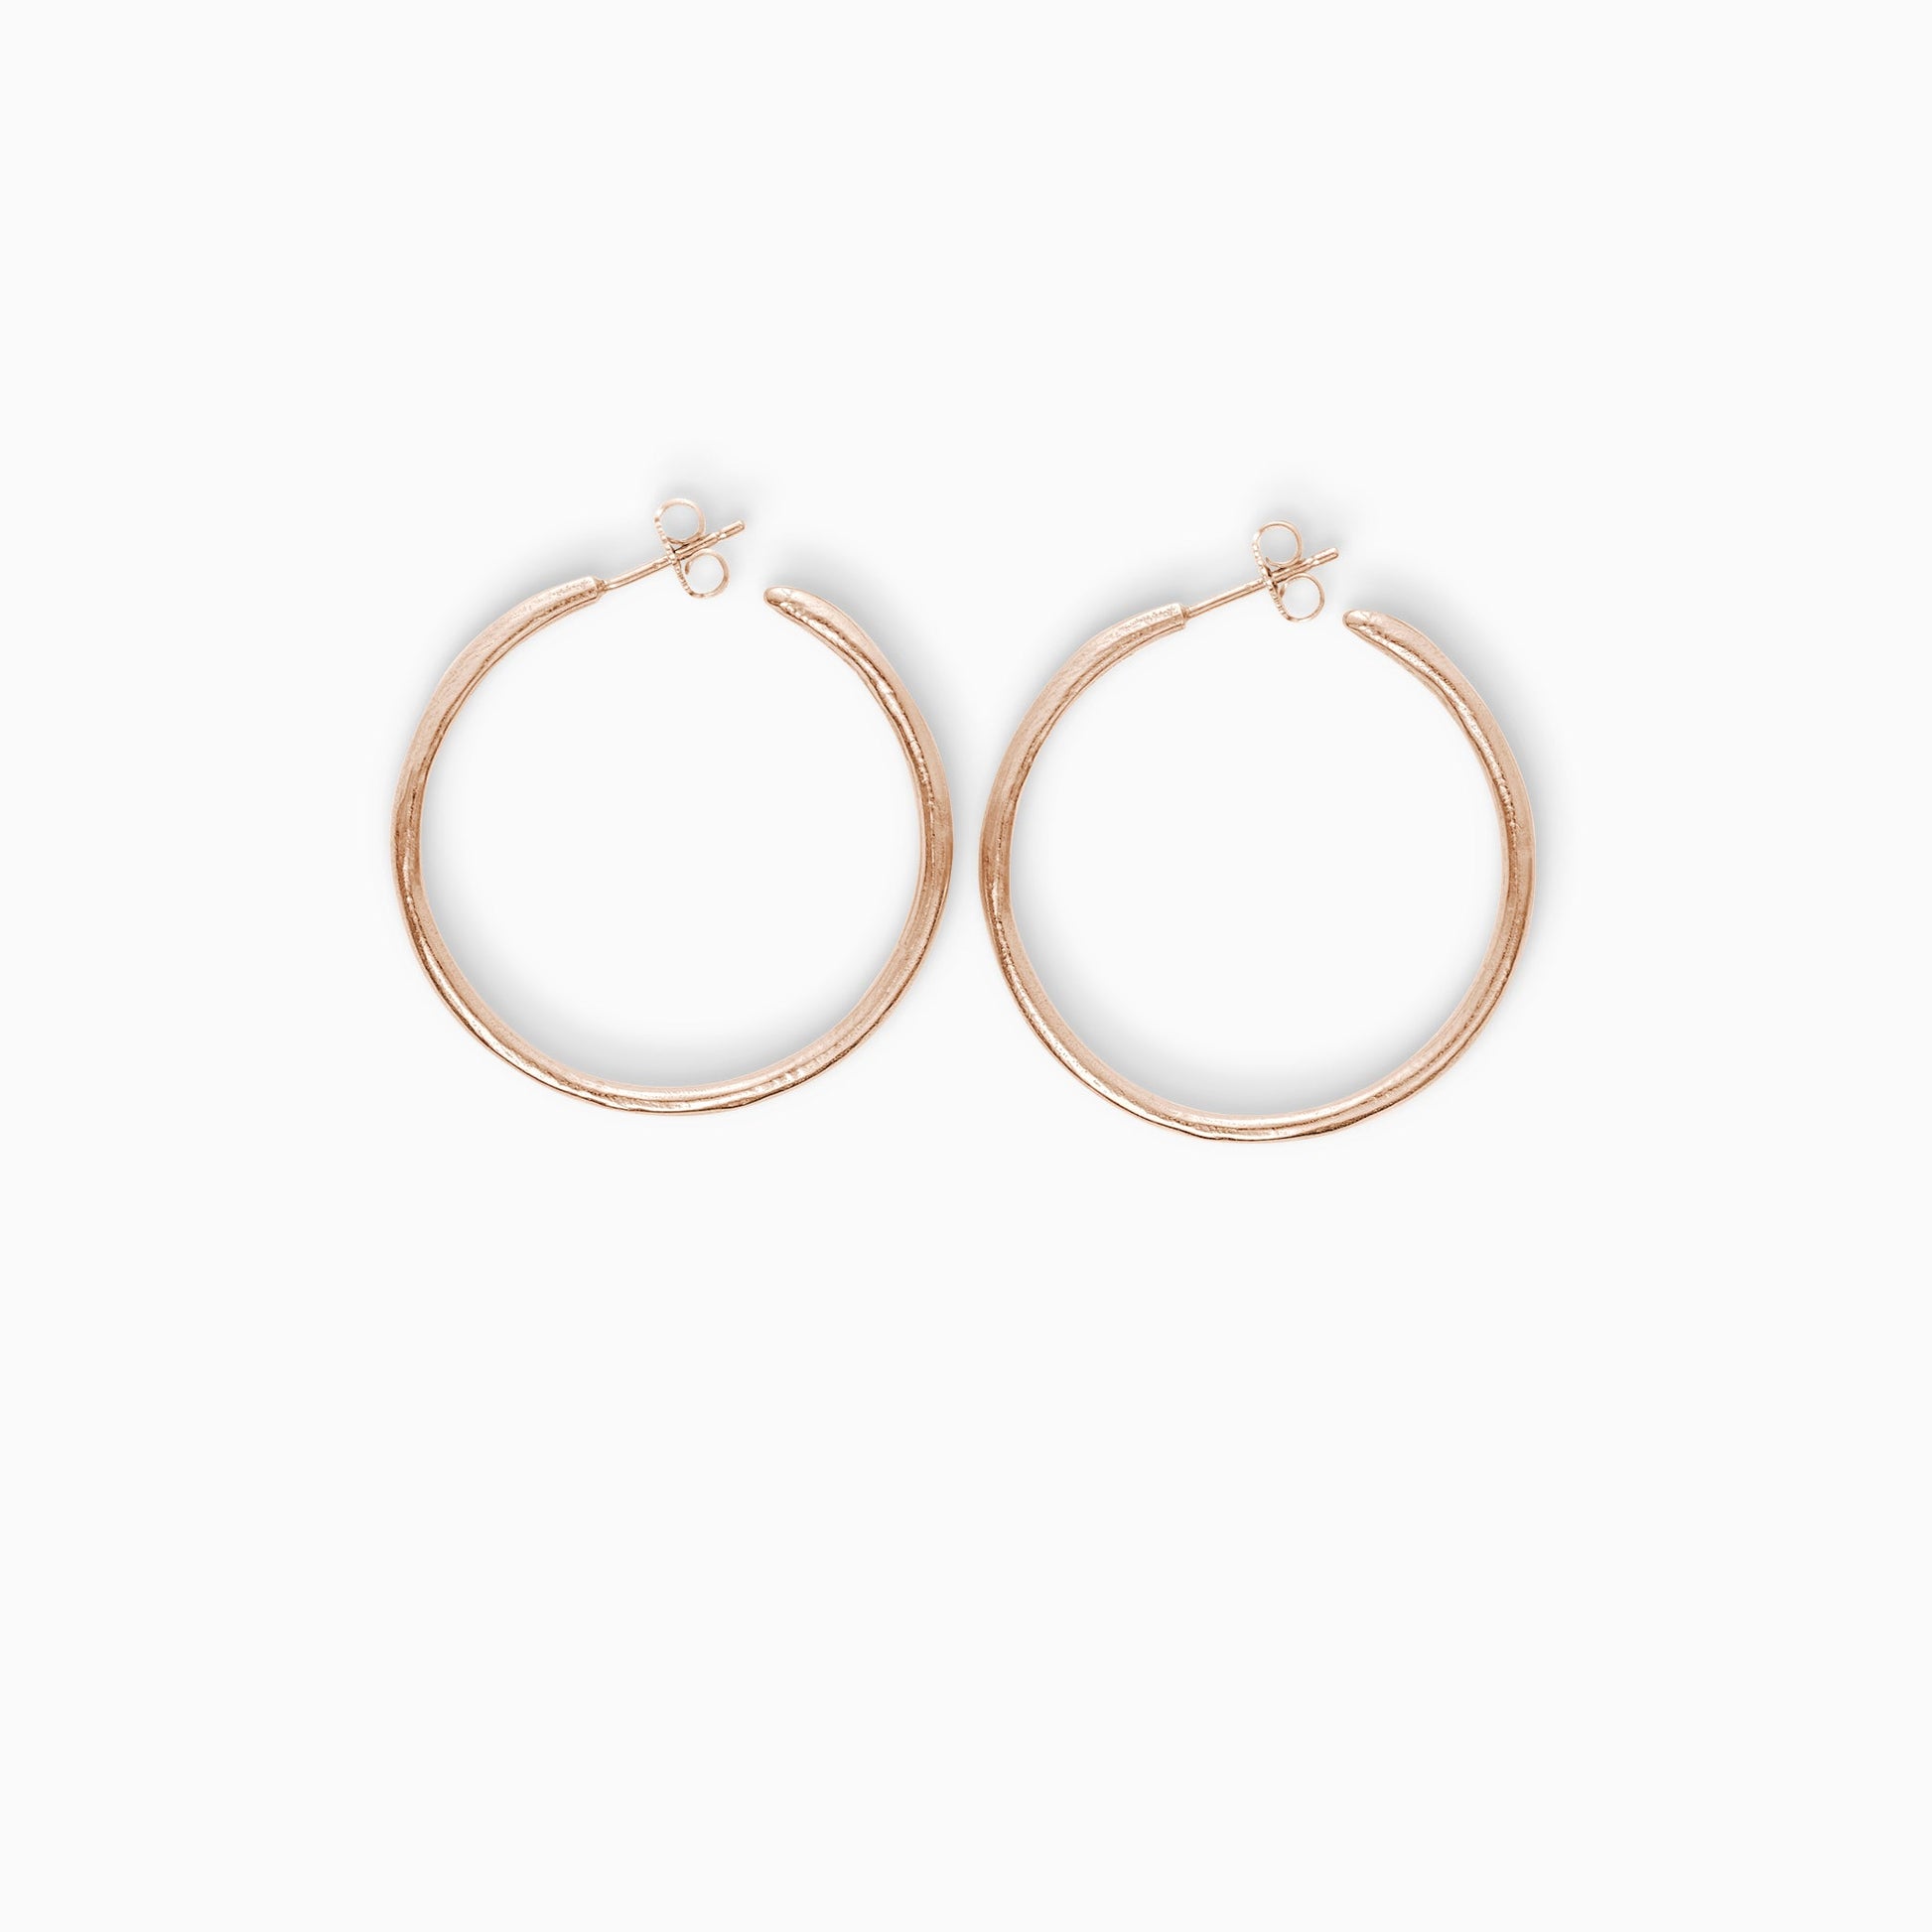 A pair of 18ct Fairtrade rose gold  round hoop earrings with a stud fastening. Organic texture and irregular profile. 36mm outside diameter.